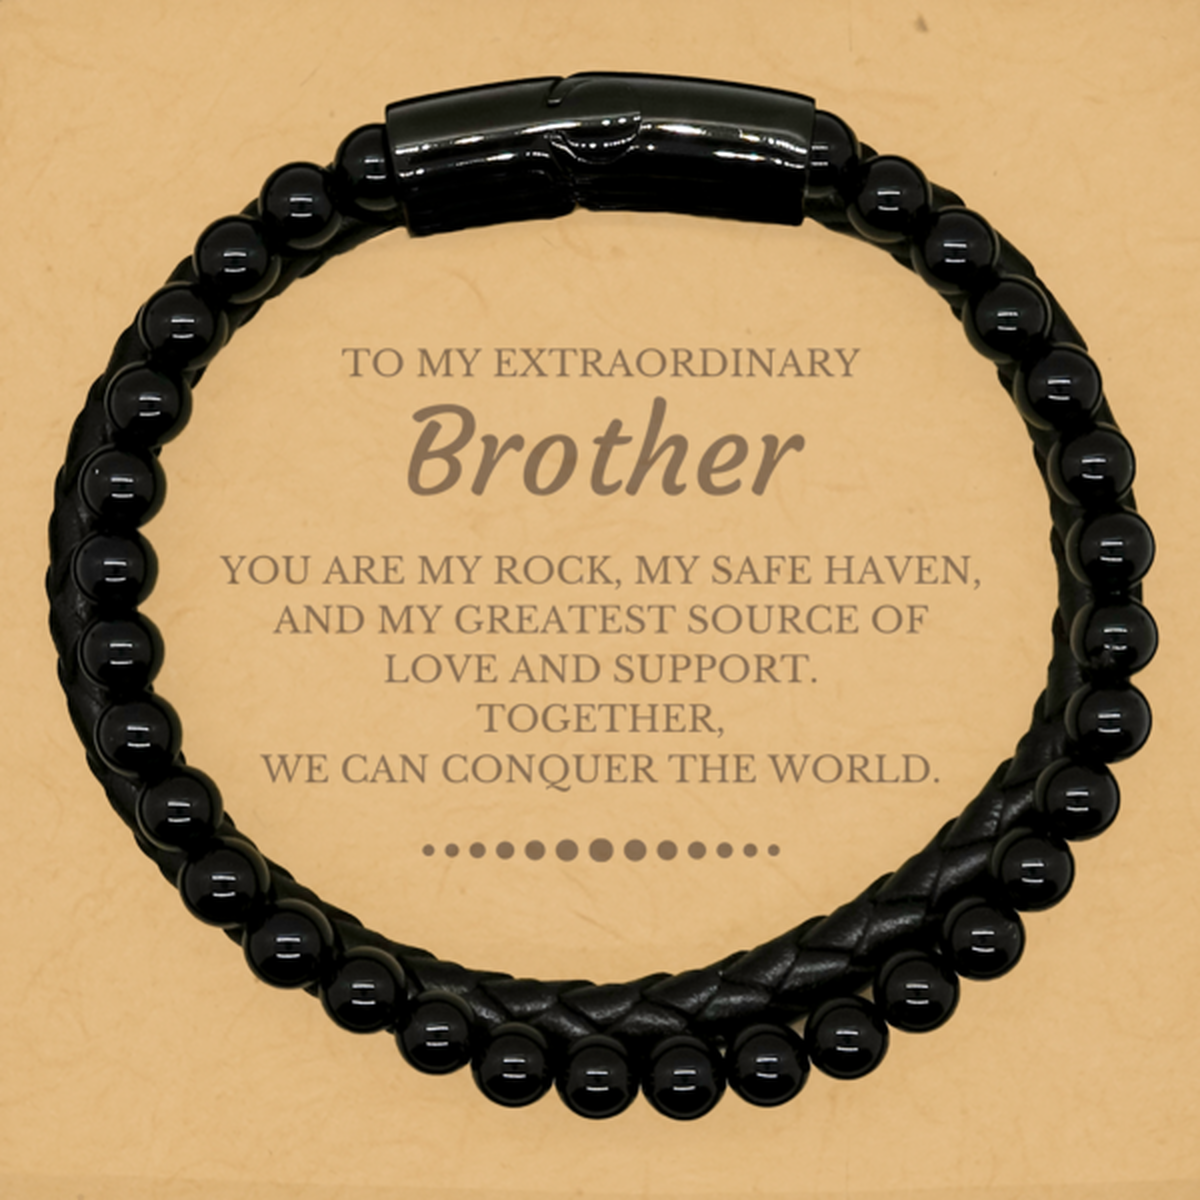 To My Extraordinary Brother Gifts, Together, we can conquer the world, Birthday Stone Leather Bracelets For Brother, Christmas Gifts For Brother